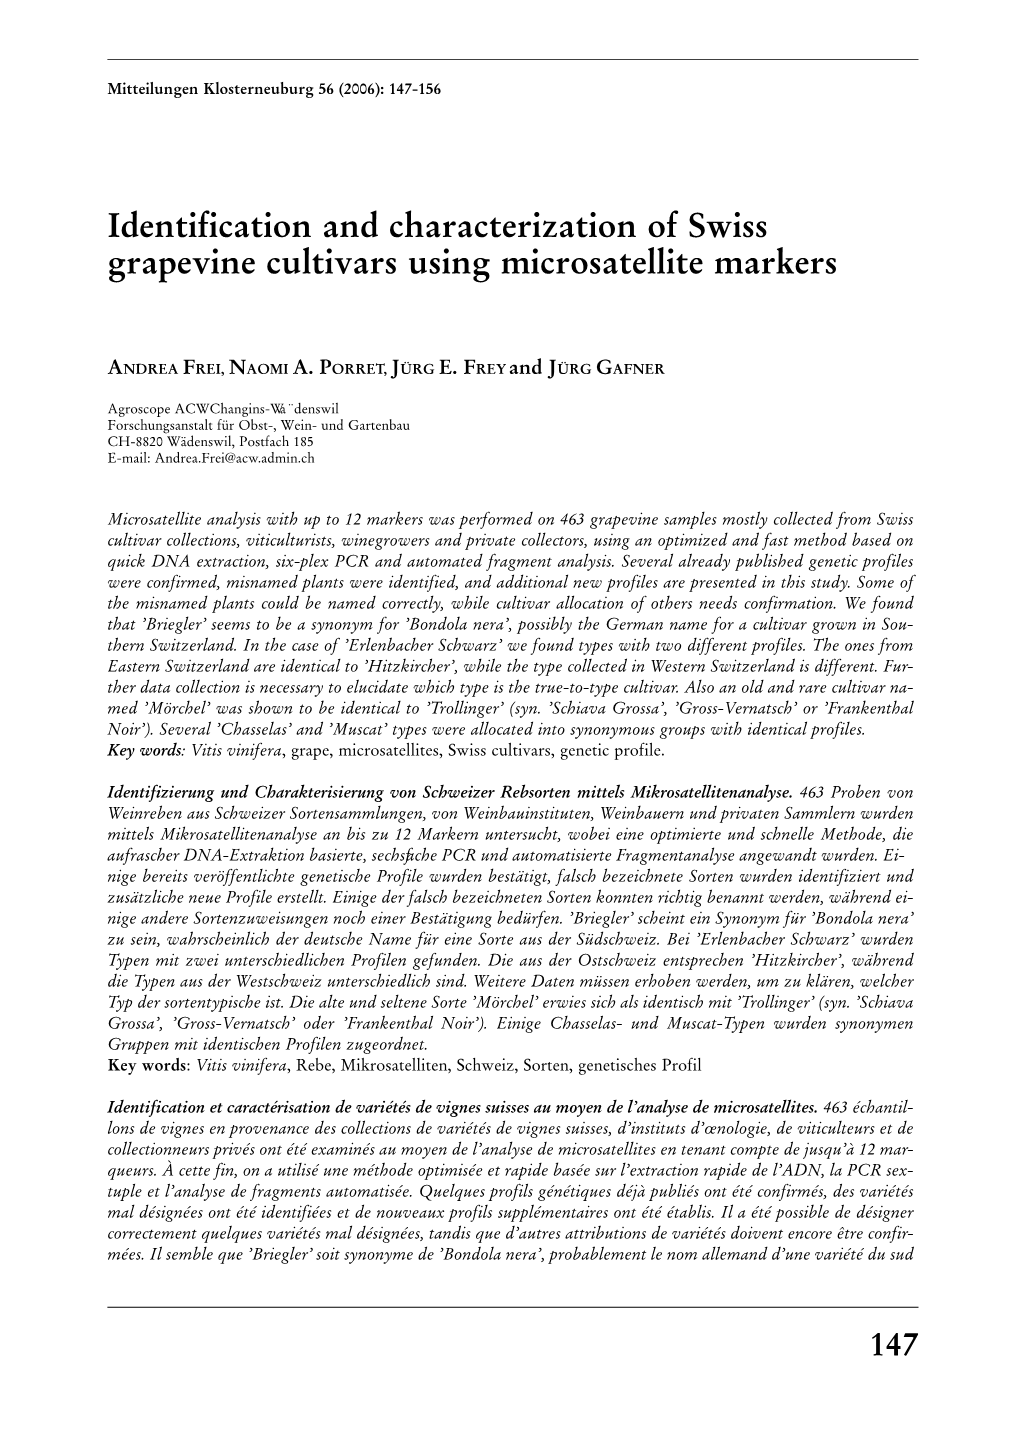 Identification and Characterization of Swiss Grapevine Cultivars Using Microsatellite Markers